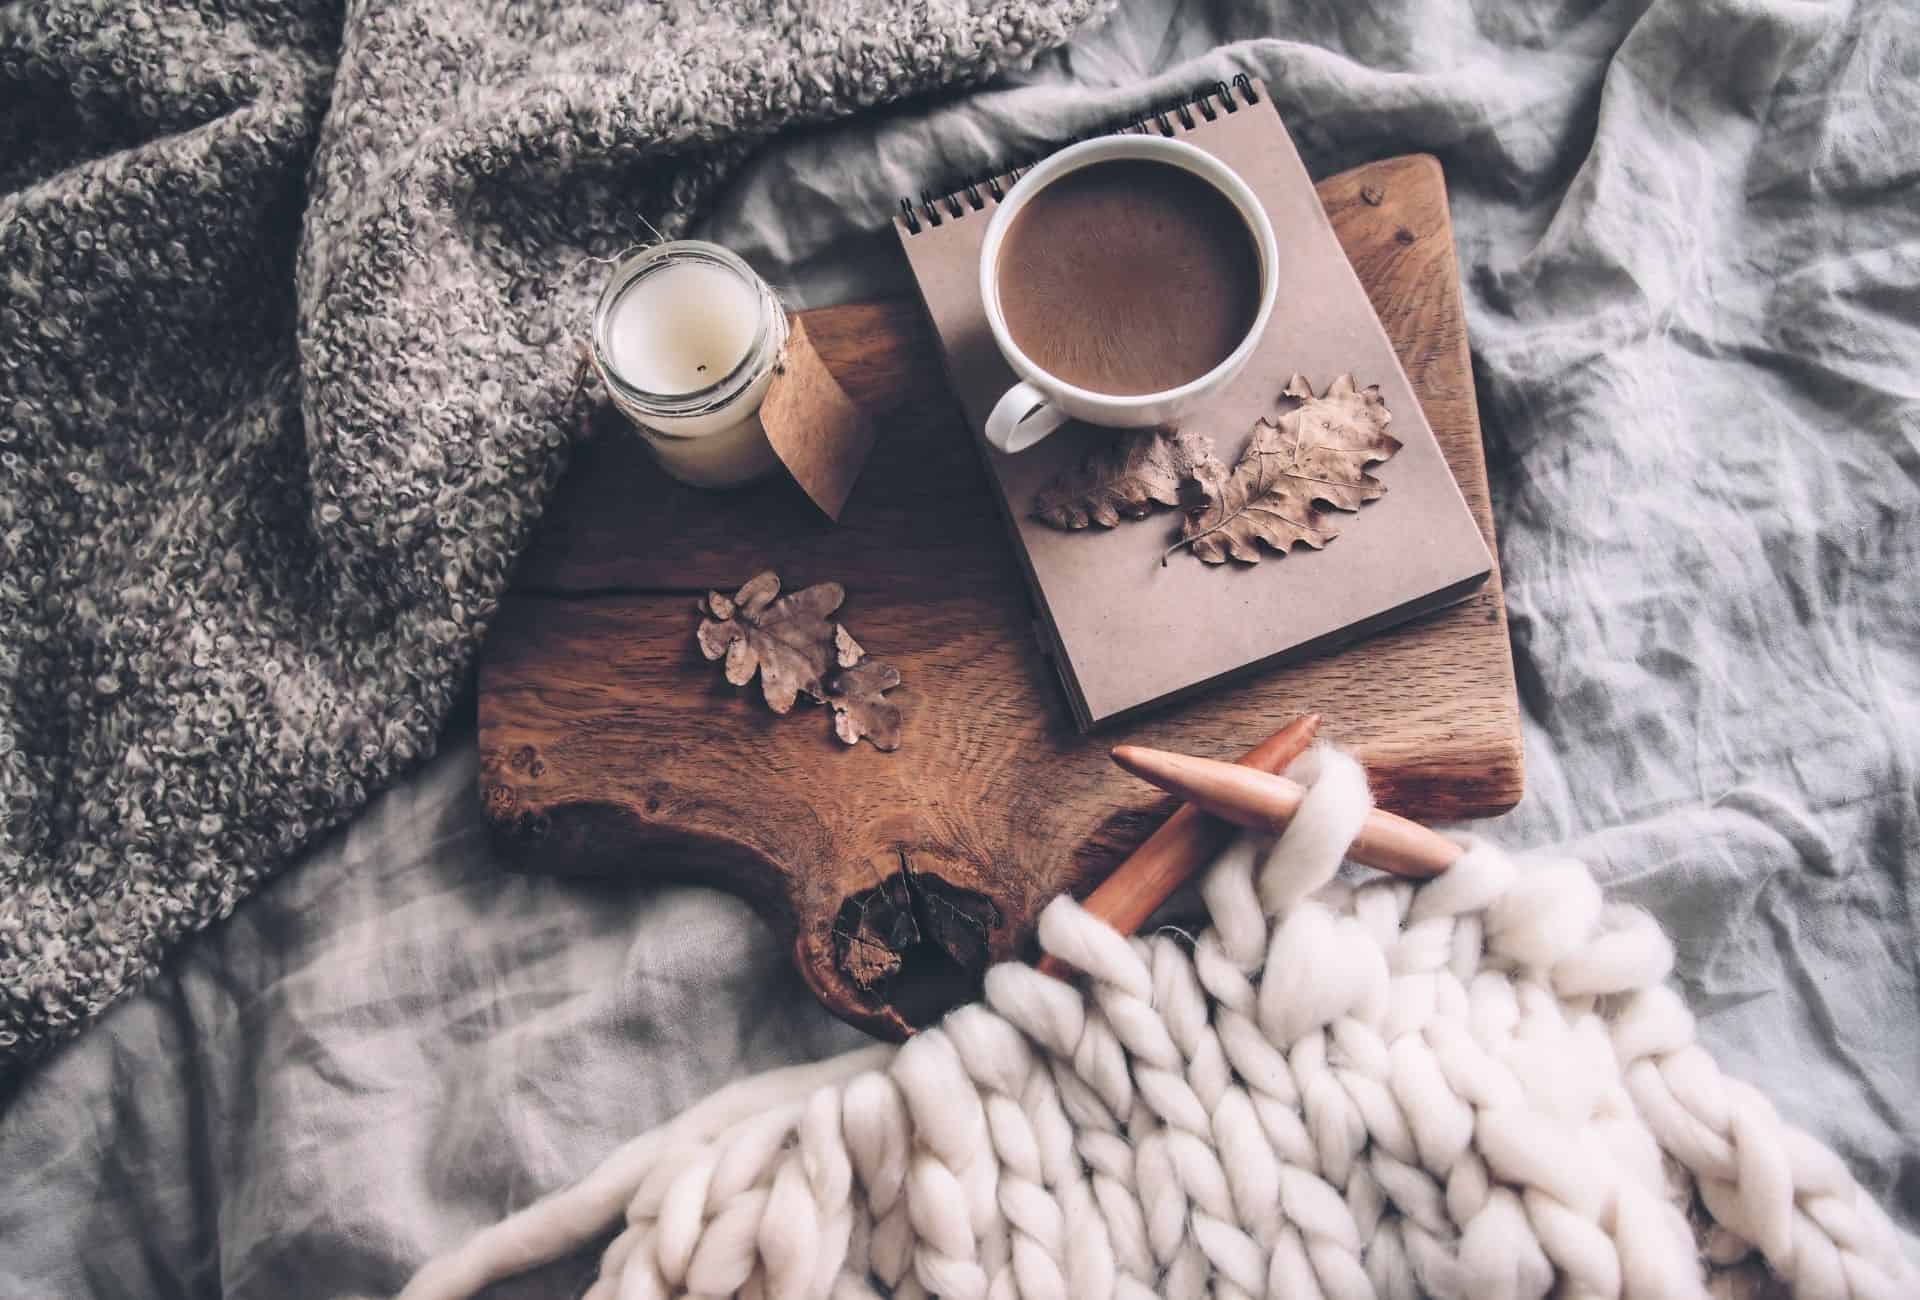 Hot chocolate and candle sitting on bed with cozy knitted blanket.